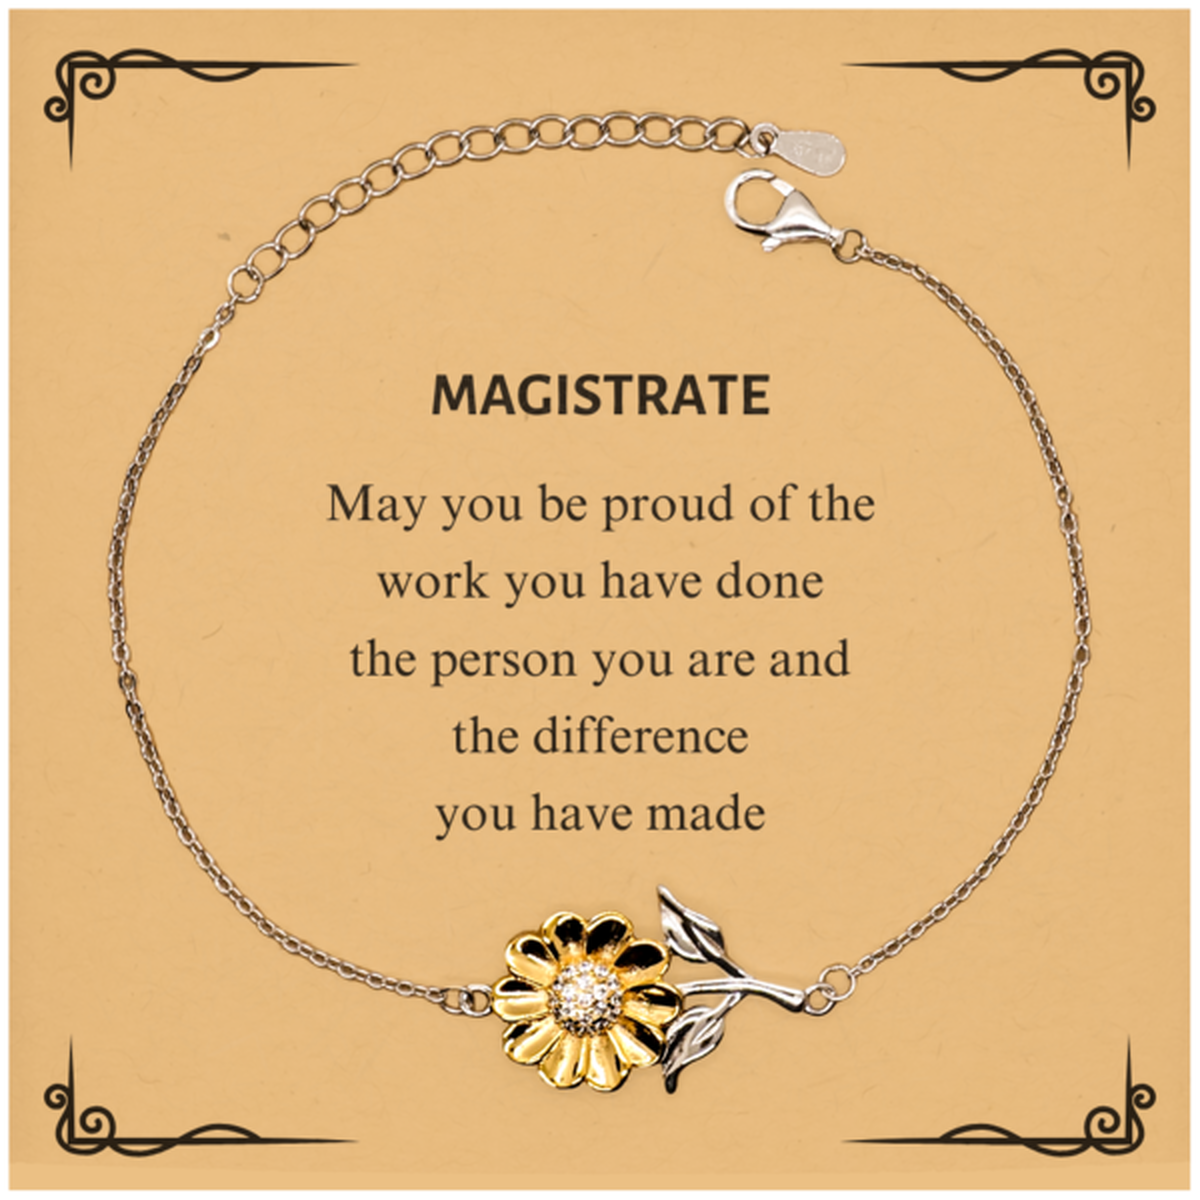 Magistrate May you be proud of the work you have done, Retirement Magistrate Sunflower Bracelet for Colleague Appreciation Gifts Amazing for Magistrate